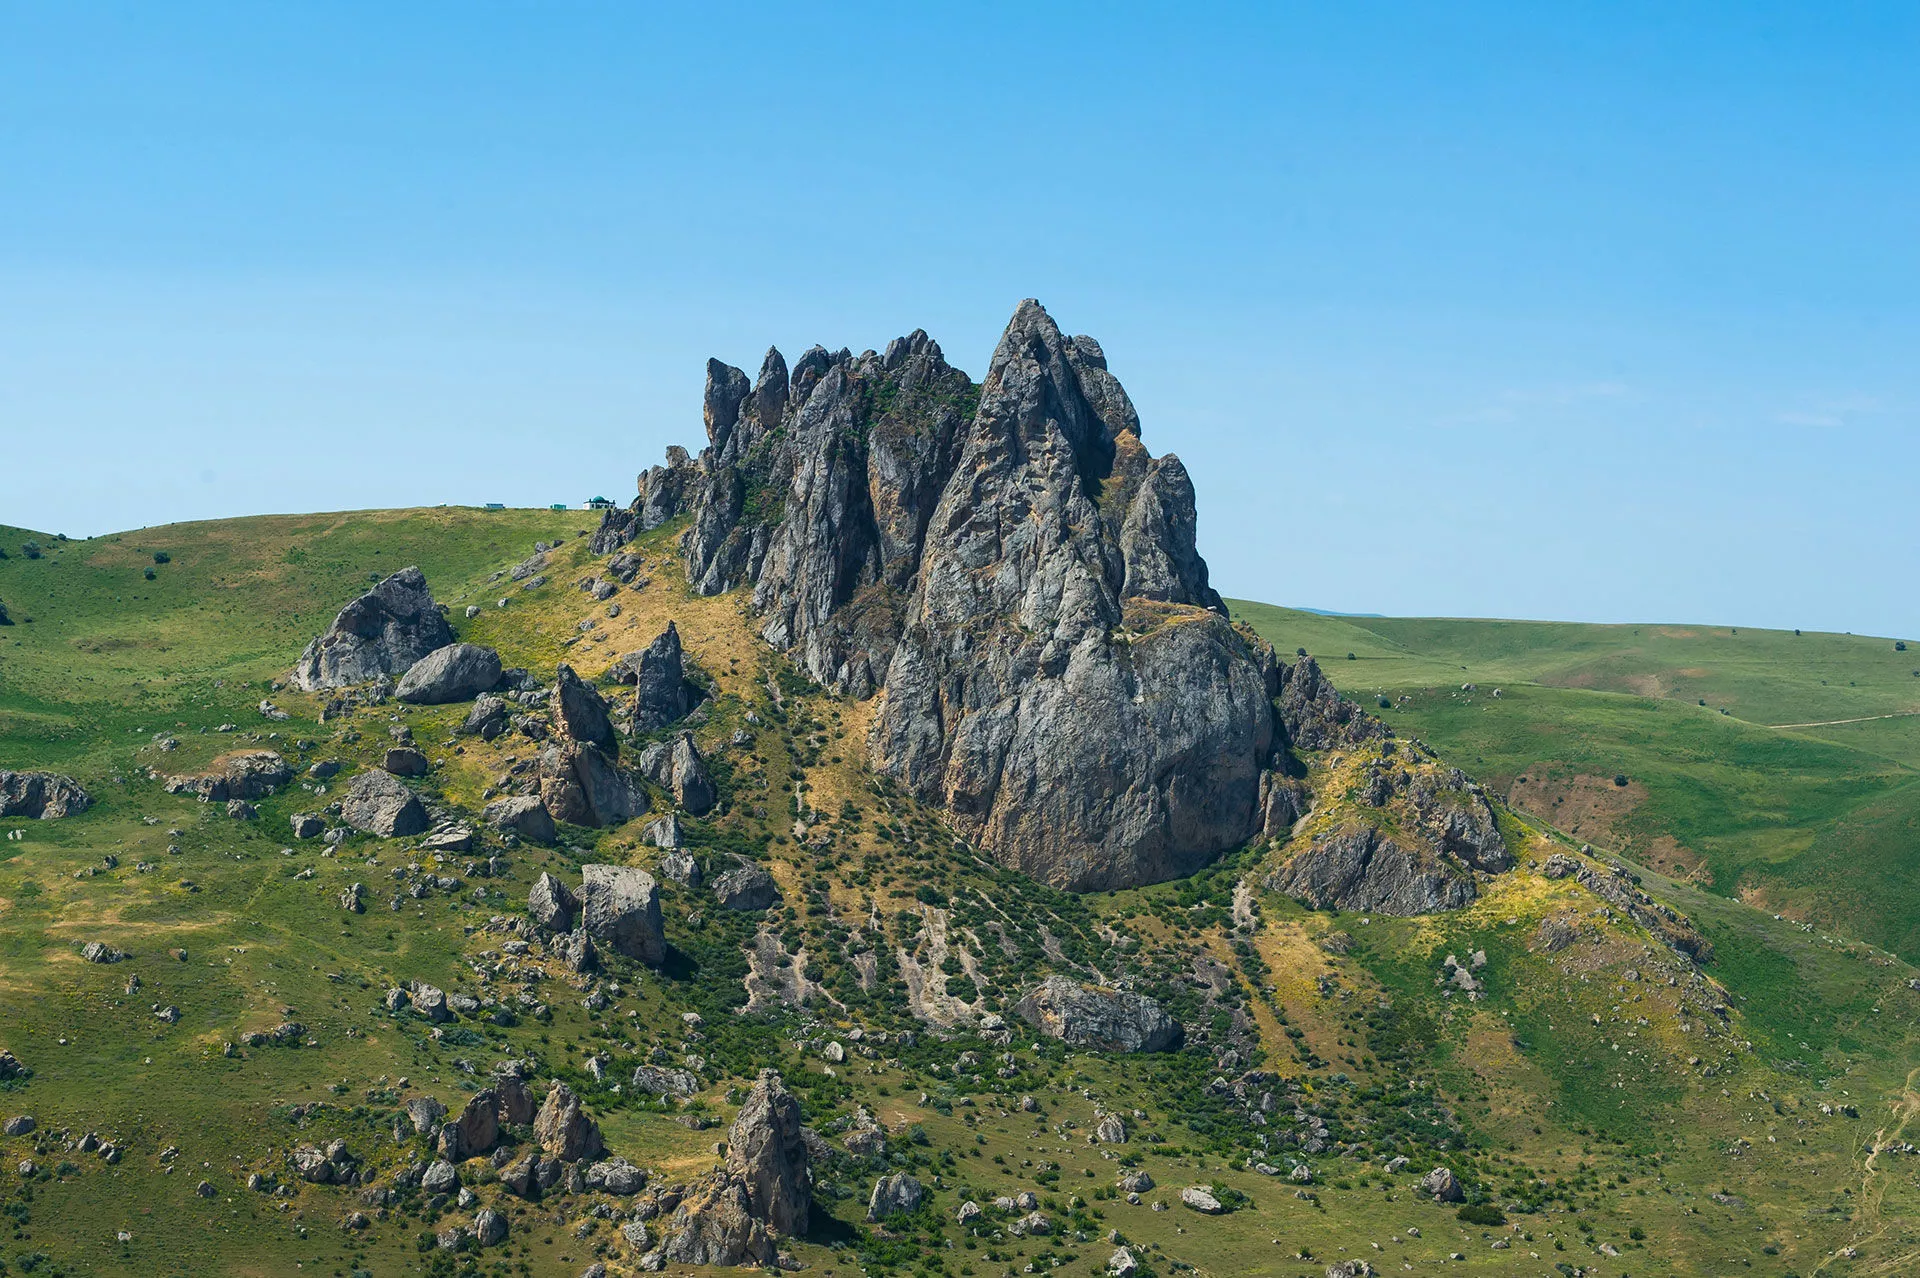 Beshbarmag Mountain in Azerbaijan, Middle East | Mountains,Trekking & Hiking - Rated 0.9